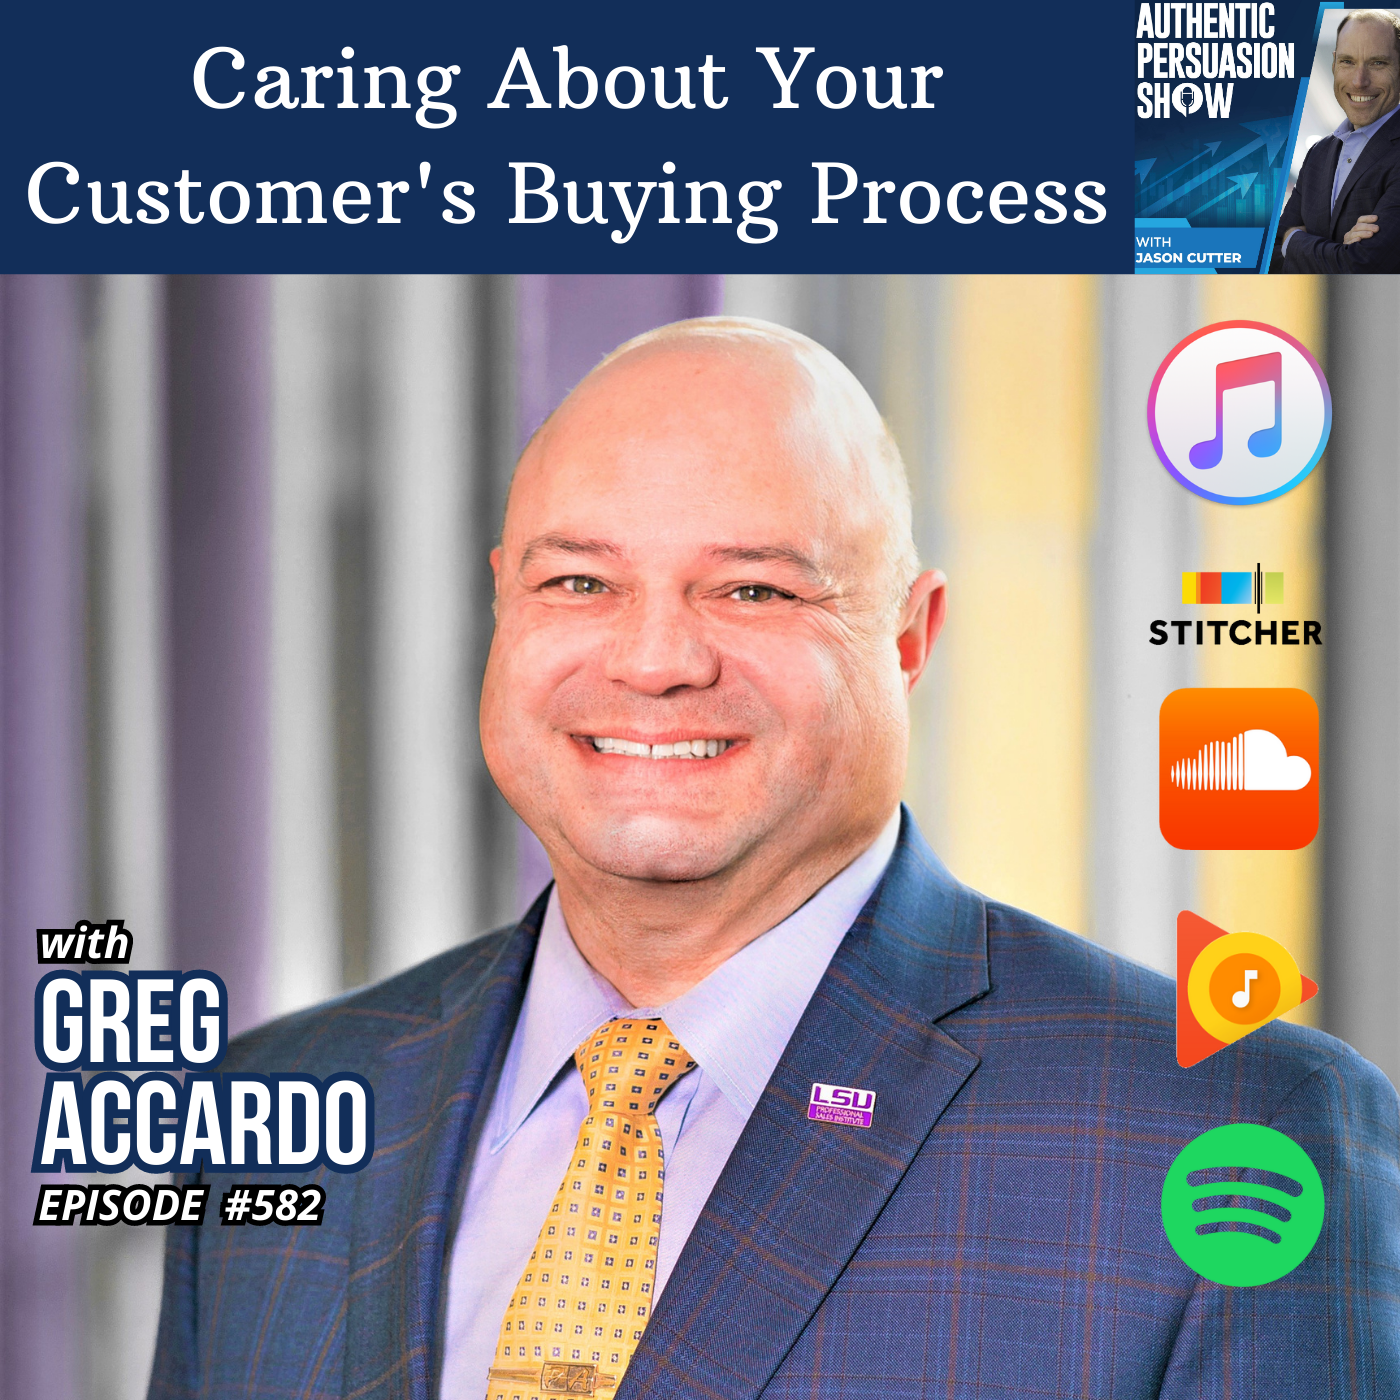 [582] Caring About Your Customer's Buying Process, with Greg Accardo from LSU